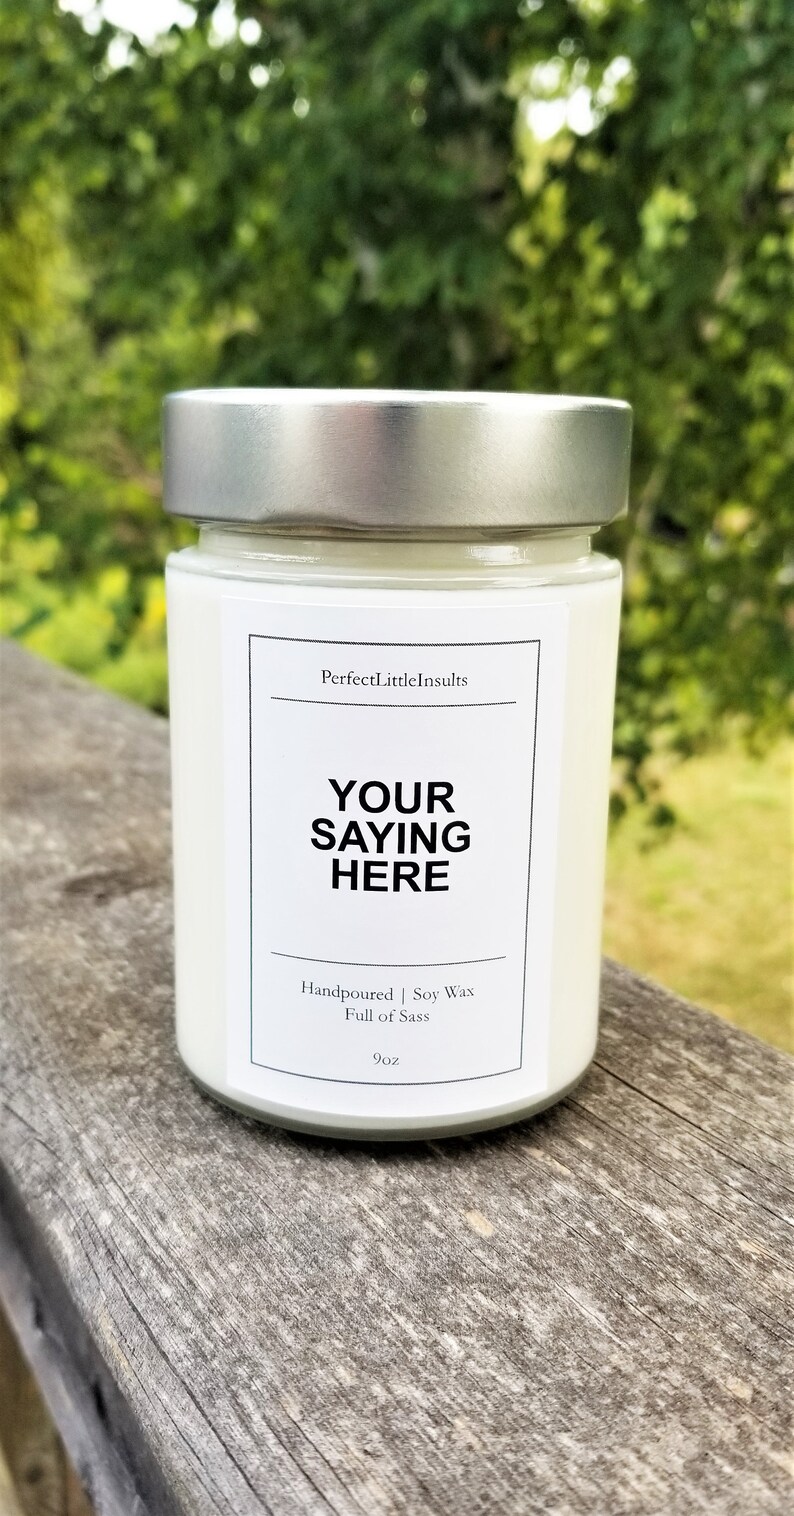 Custom Candle, Soy Wax Candle, Personalized Candle, Funny Gift, Custom Saying, Insult Gift, Funny Candle, Customizable Candle, Soy Wax image 2